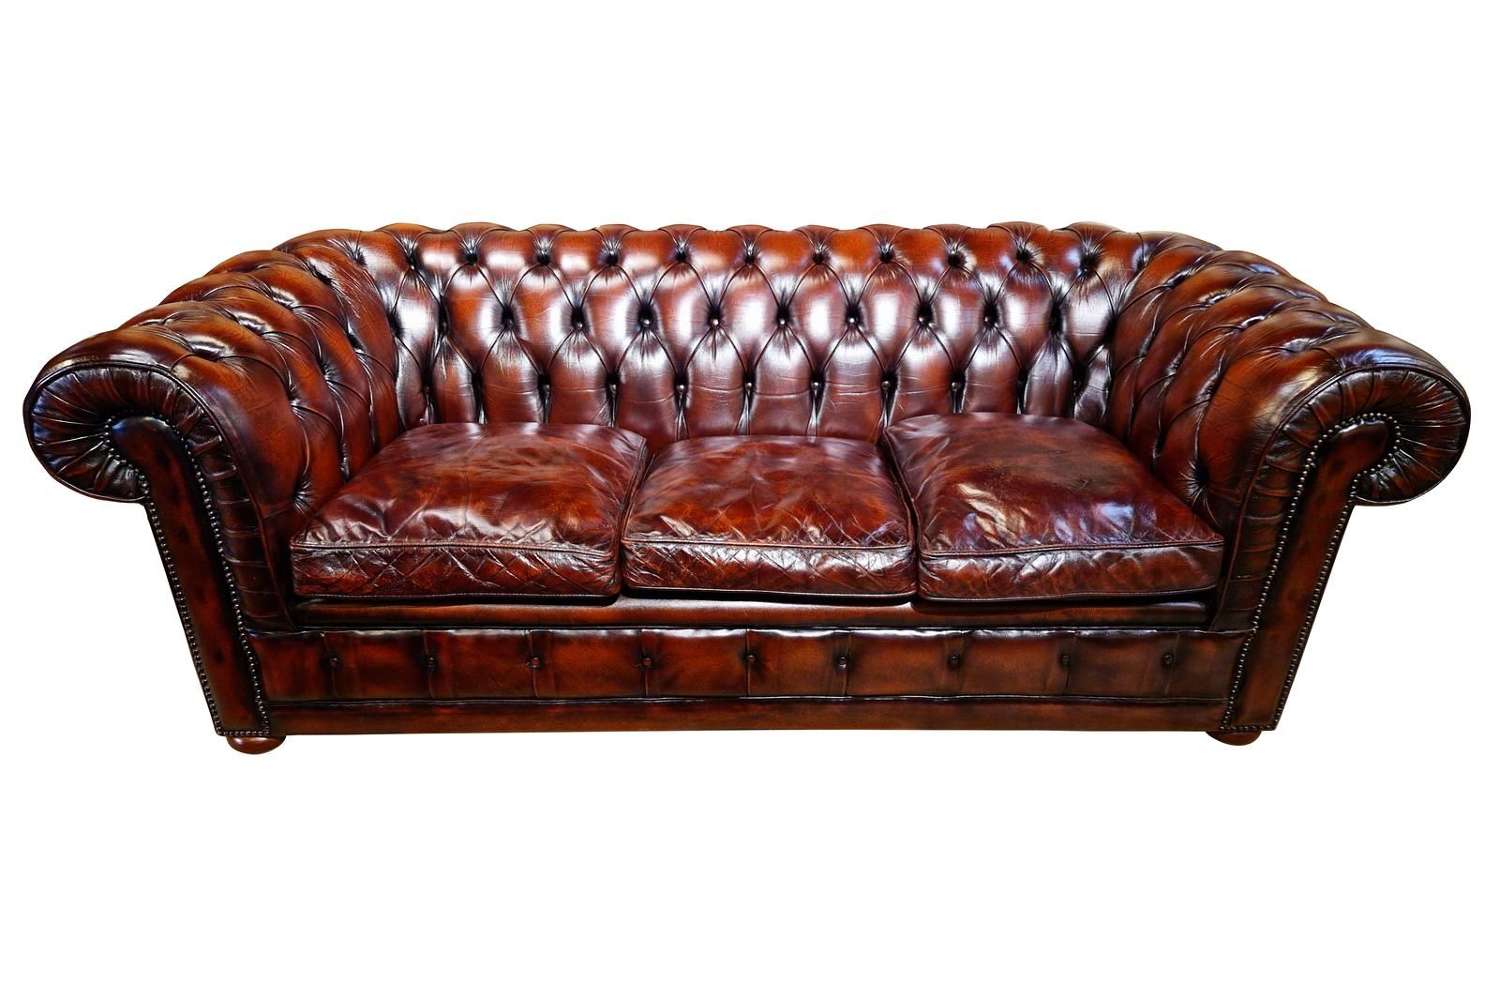 Chestnut Brown Leather Chesterfield